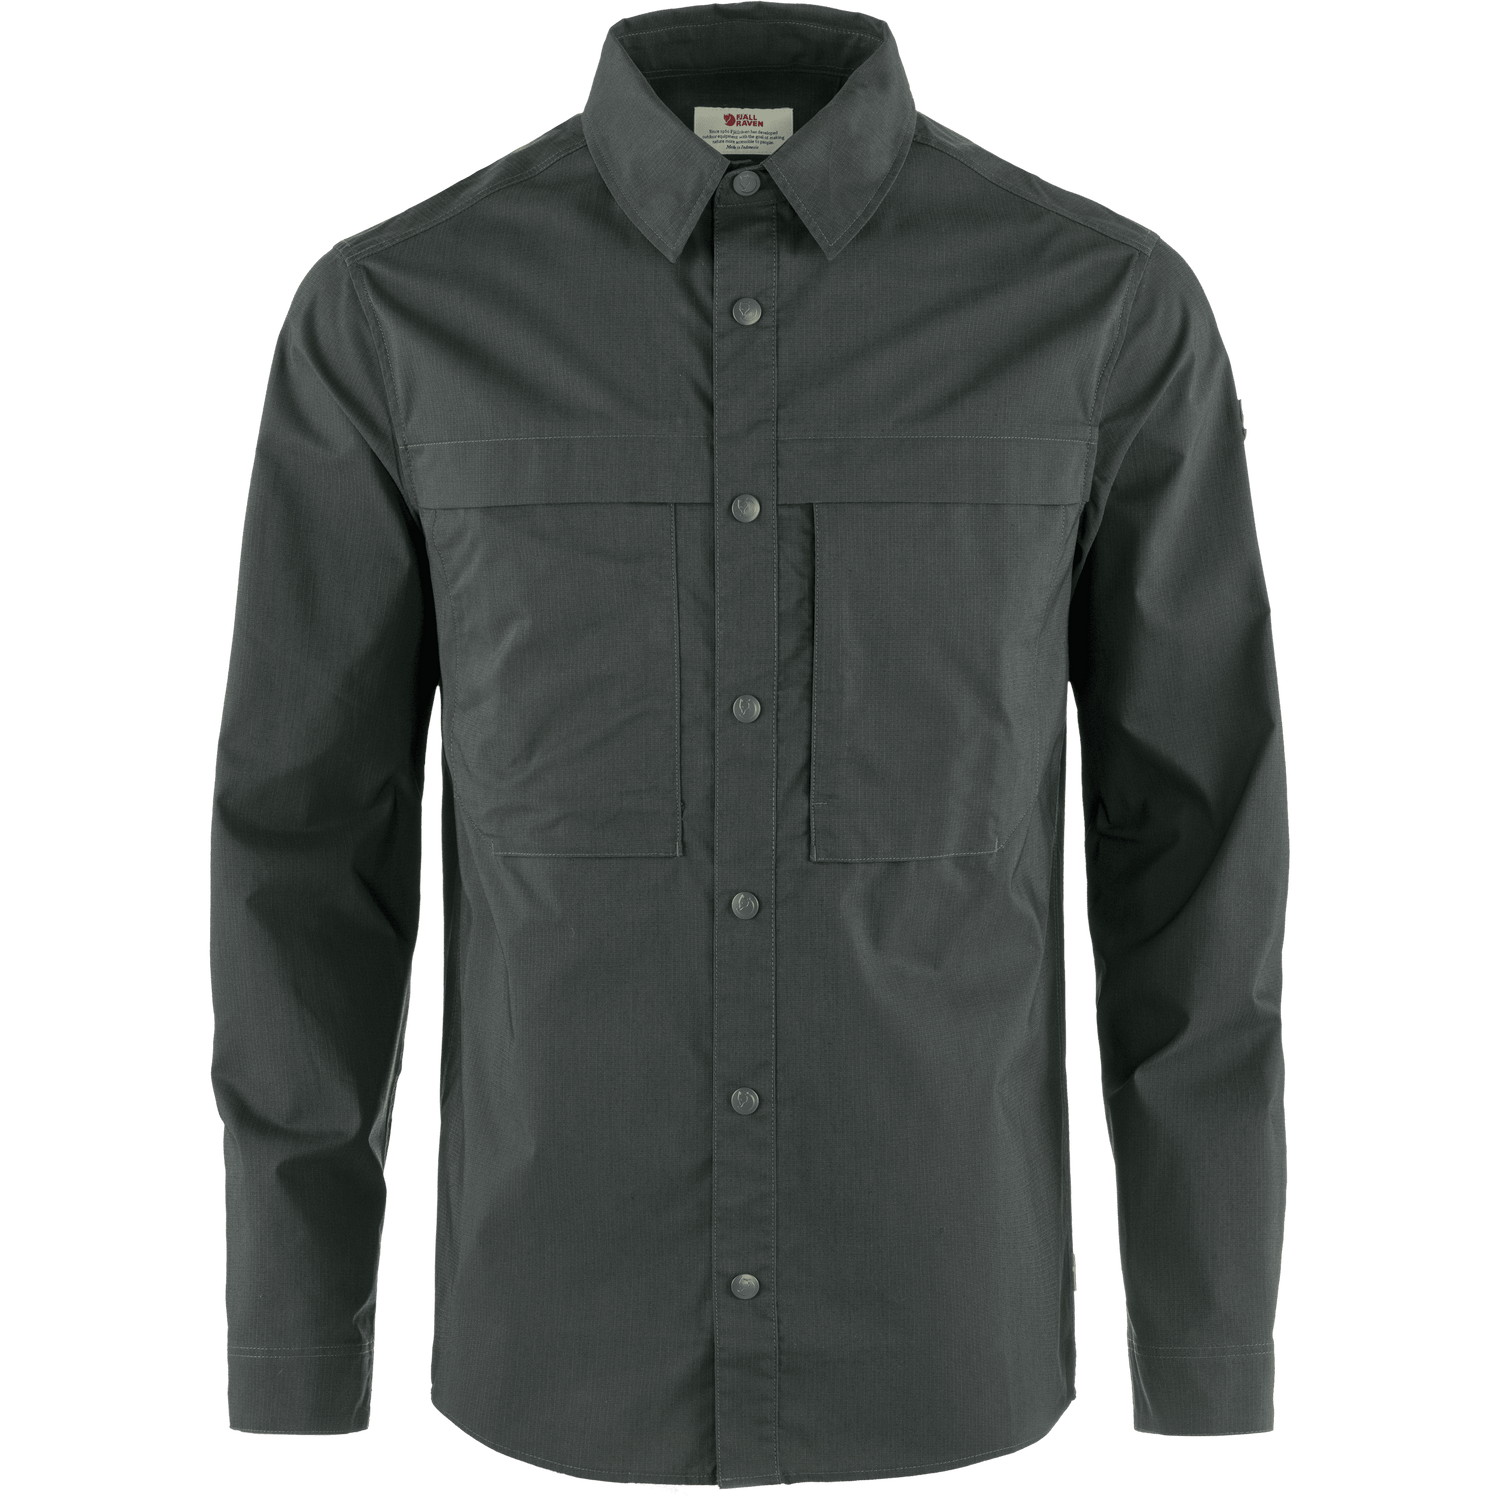 Fjällräven - M's Abisko Trail Shirt LS - Recycled polyester & Polyester & Organic cotton - Weekendbee - sustainable sportswear